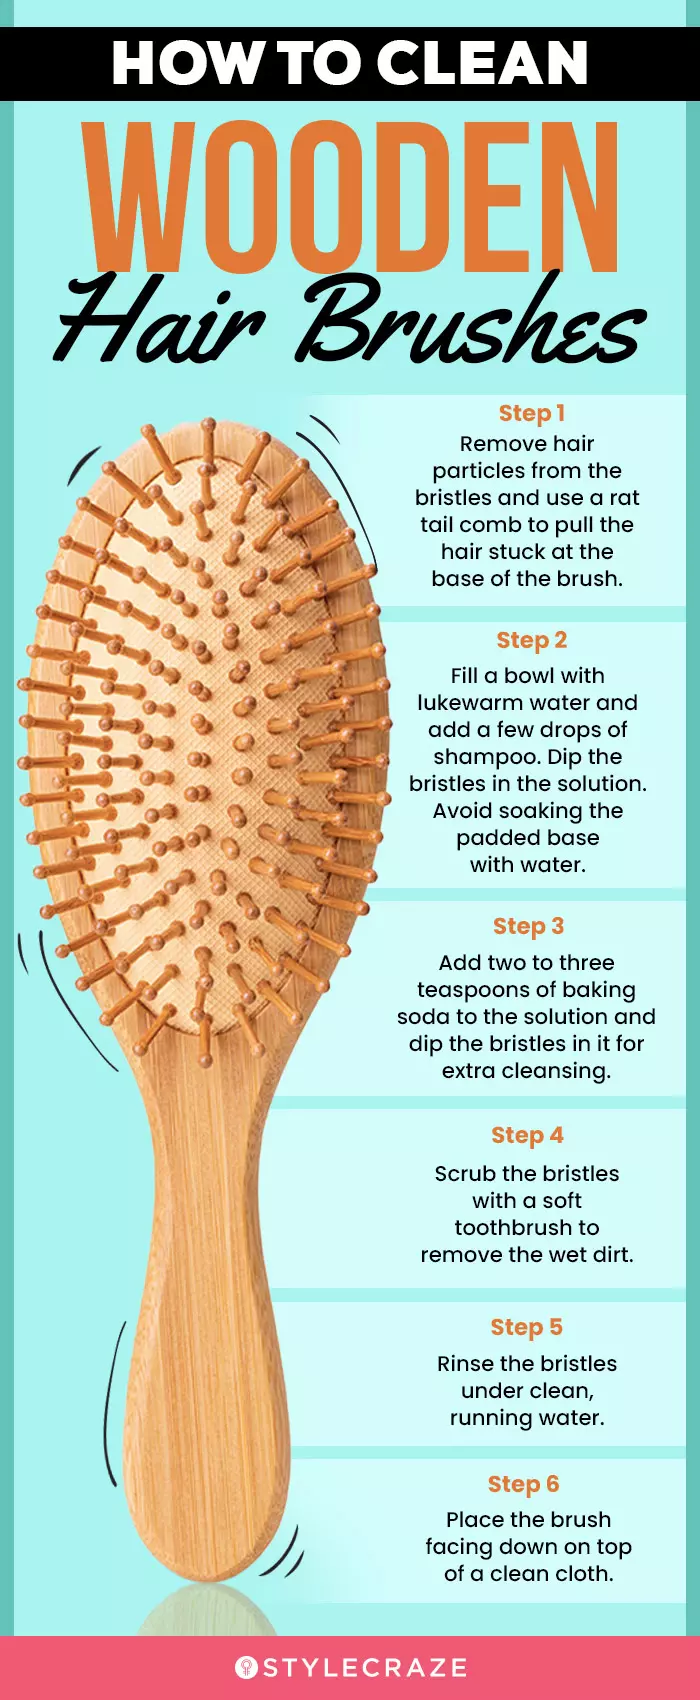 How To Clean Wooden Hair Brushes (infographic)